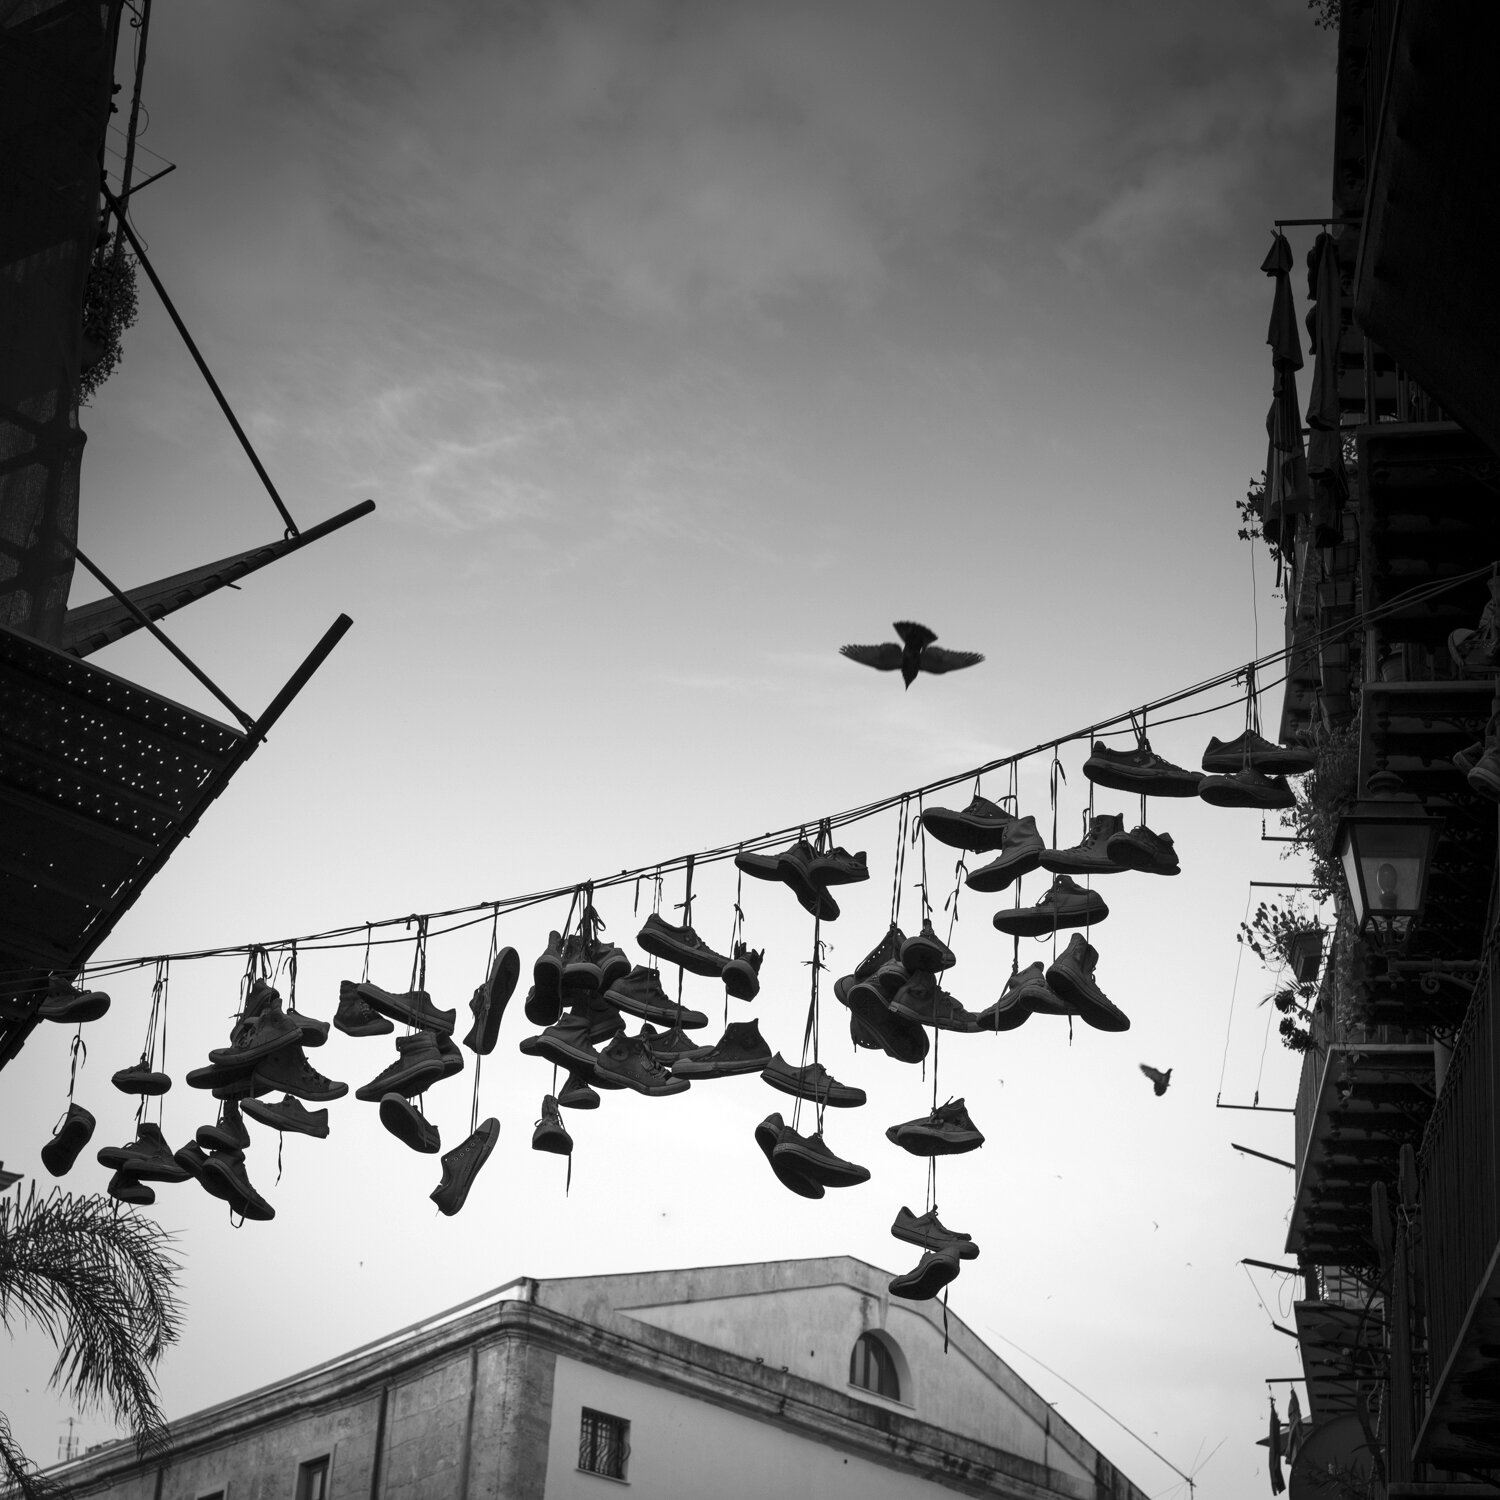   Shoes on line   Palermo, Italy 2019      1:1  